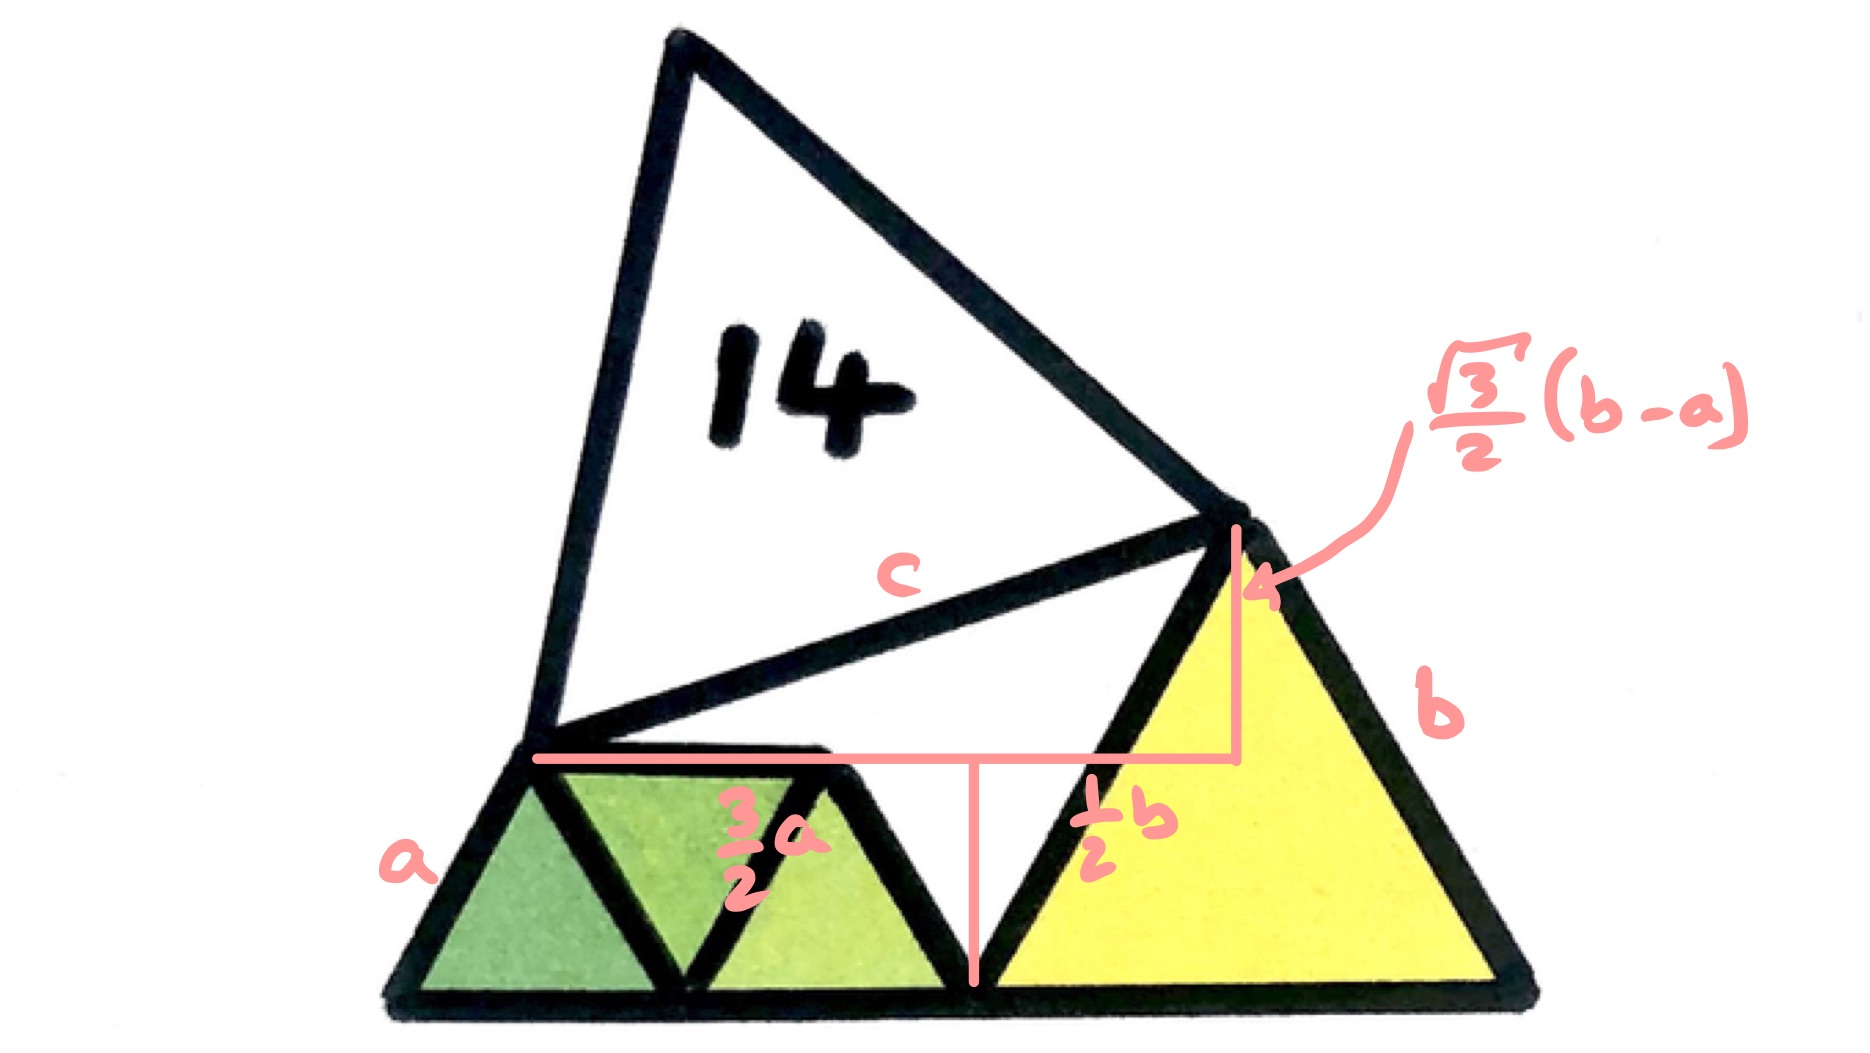 Five equilateral triangles first version with Pythagoras